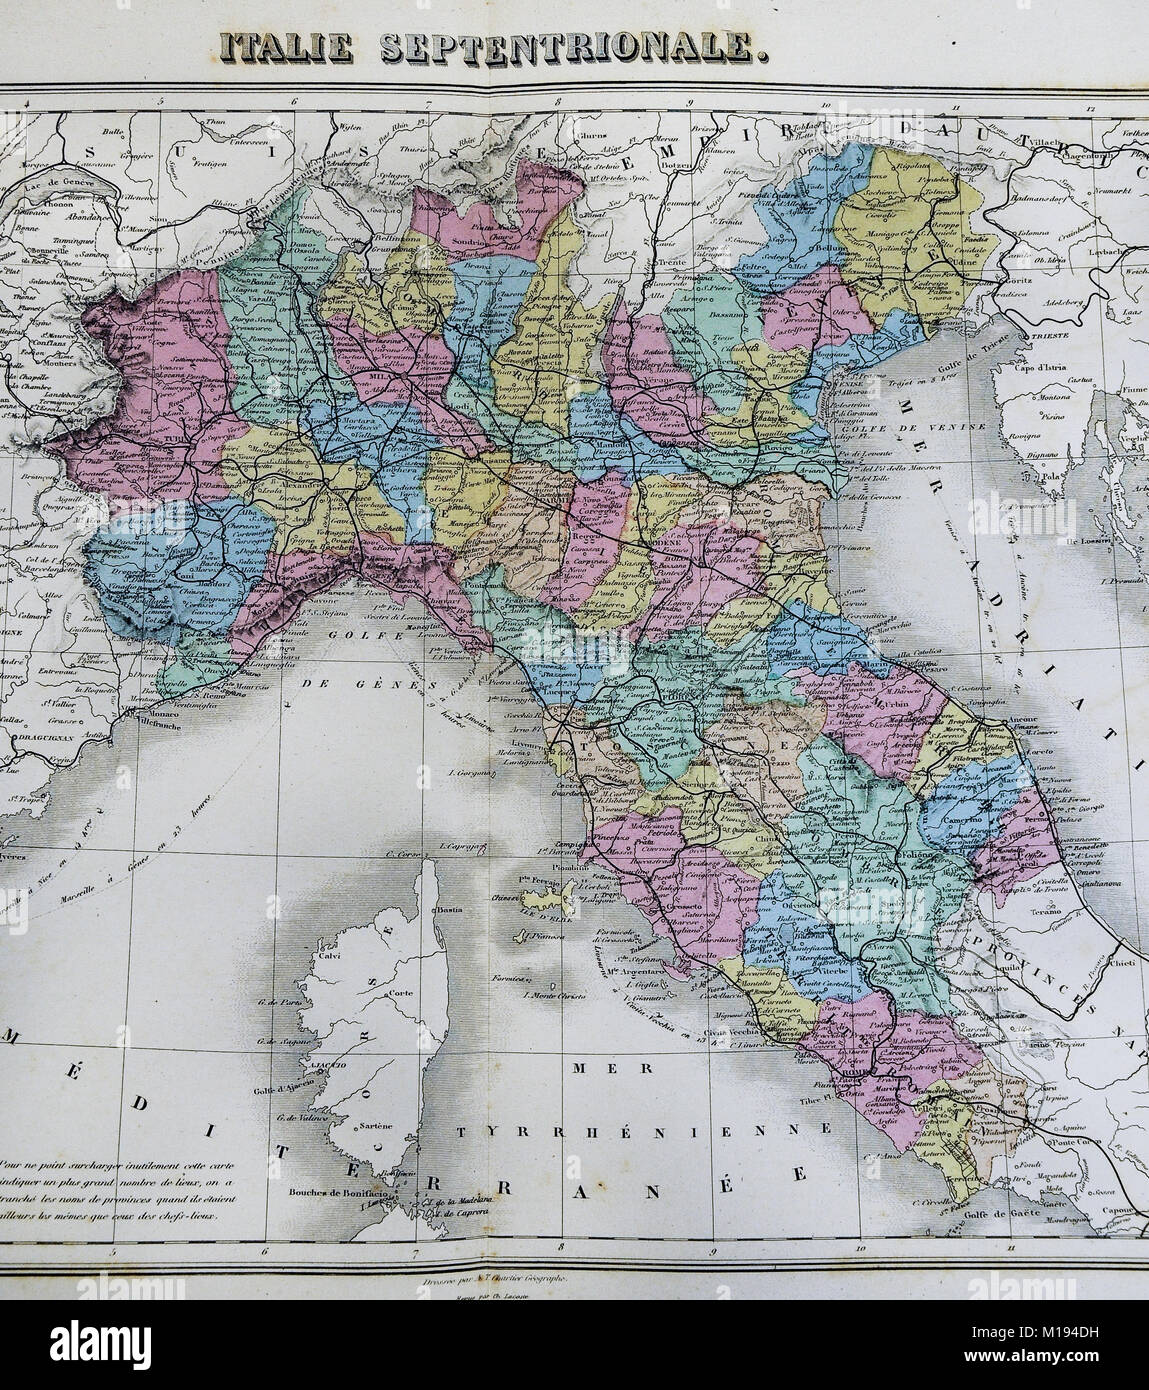 1877 Migeon Map - North Italy - Stock Photo